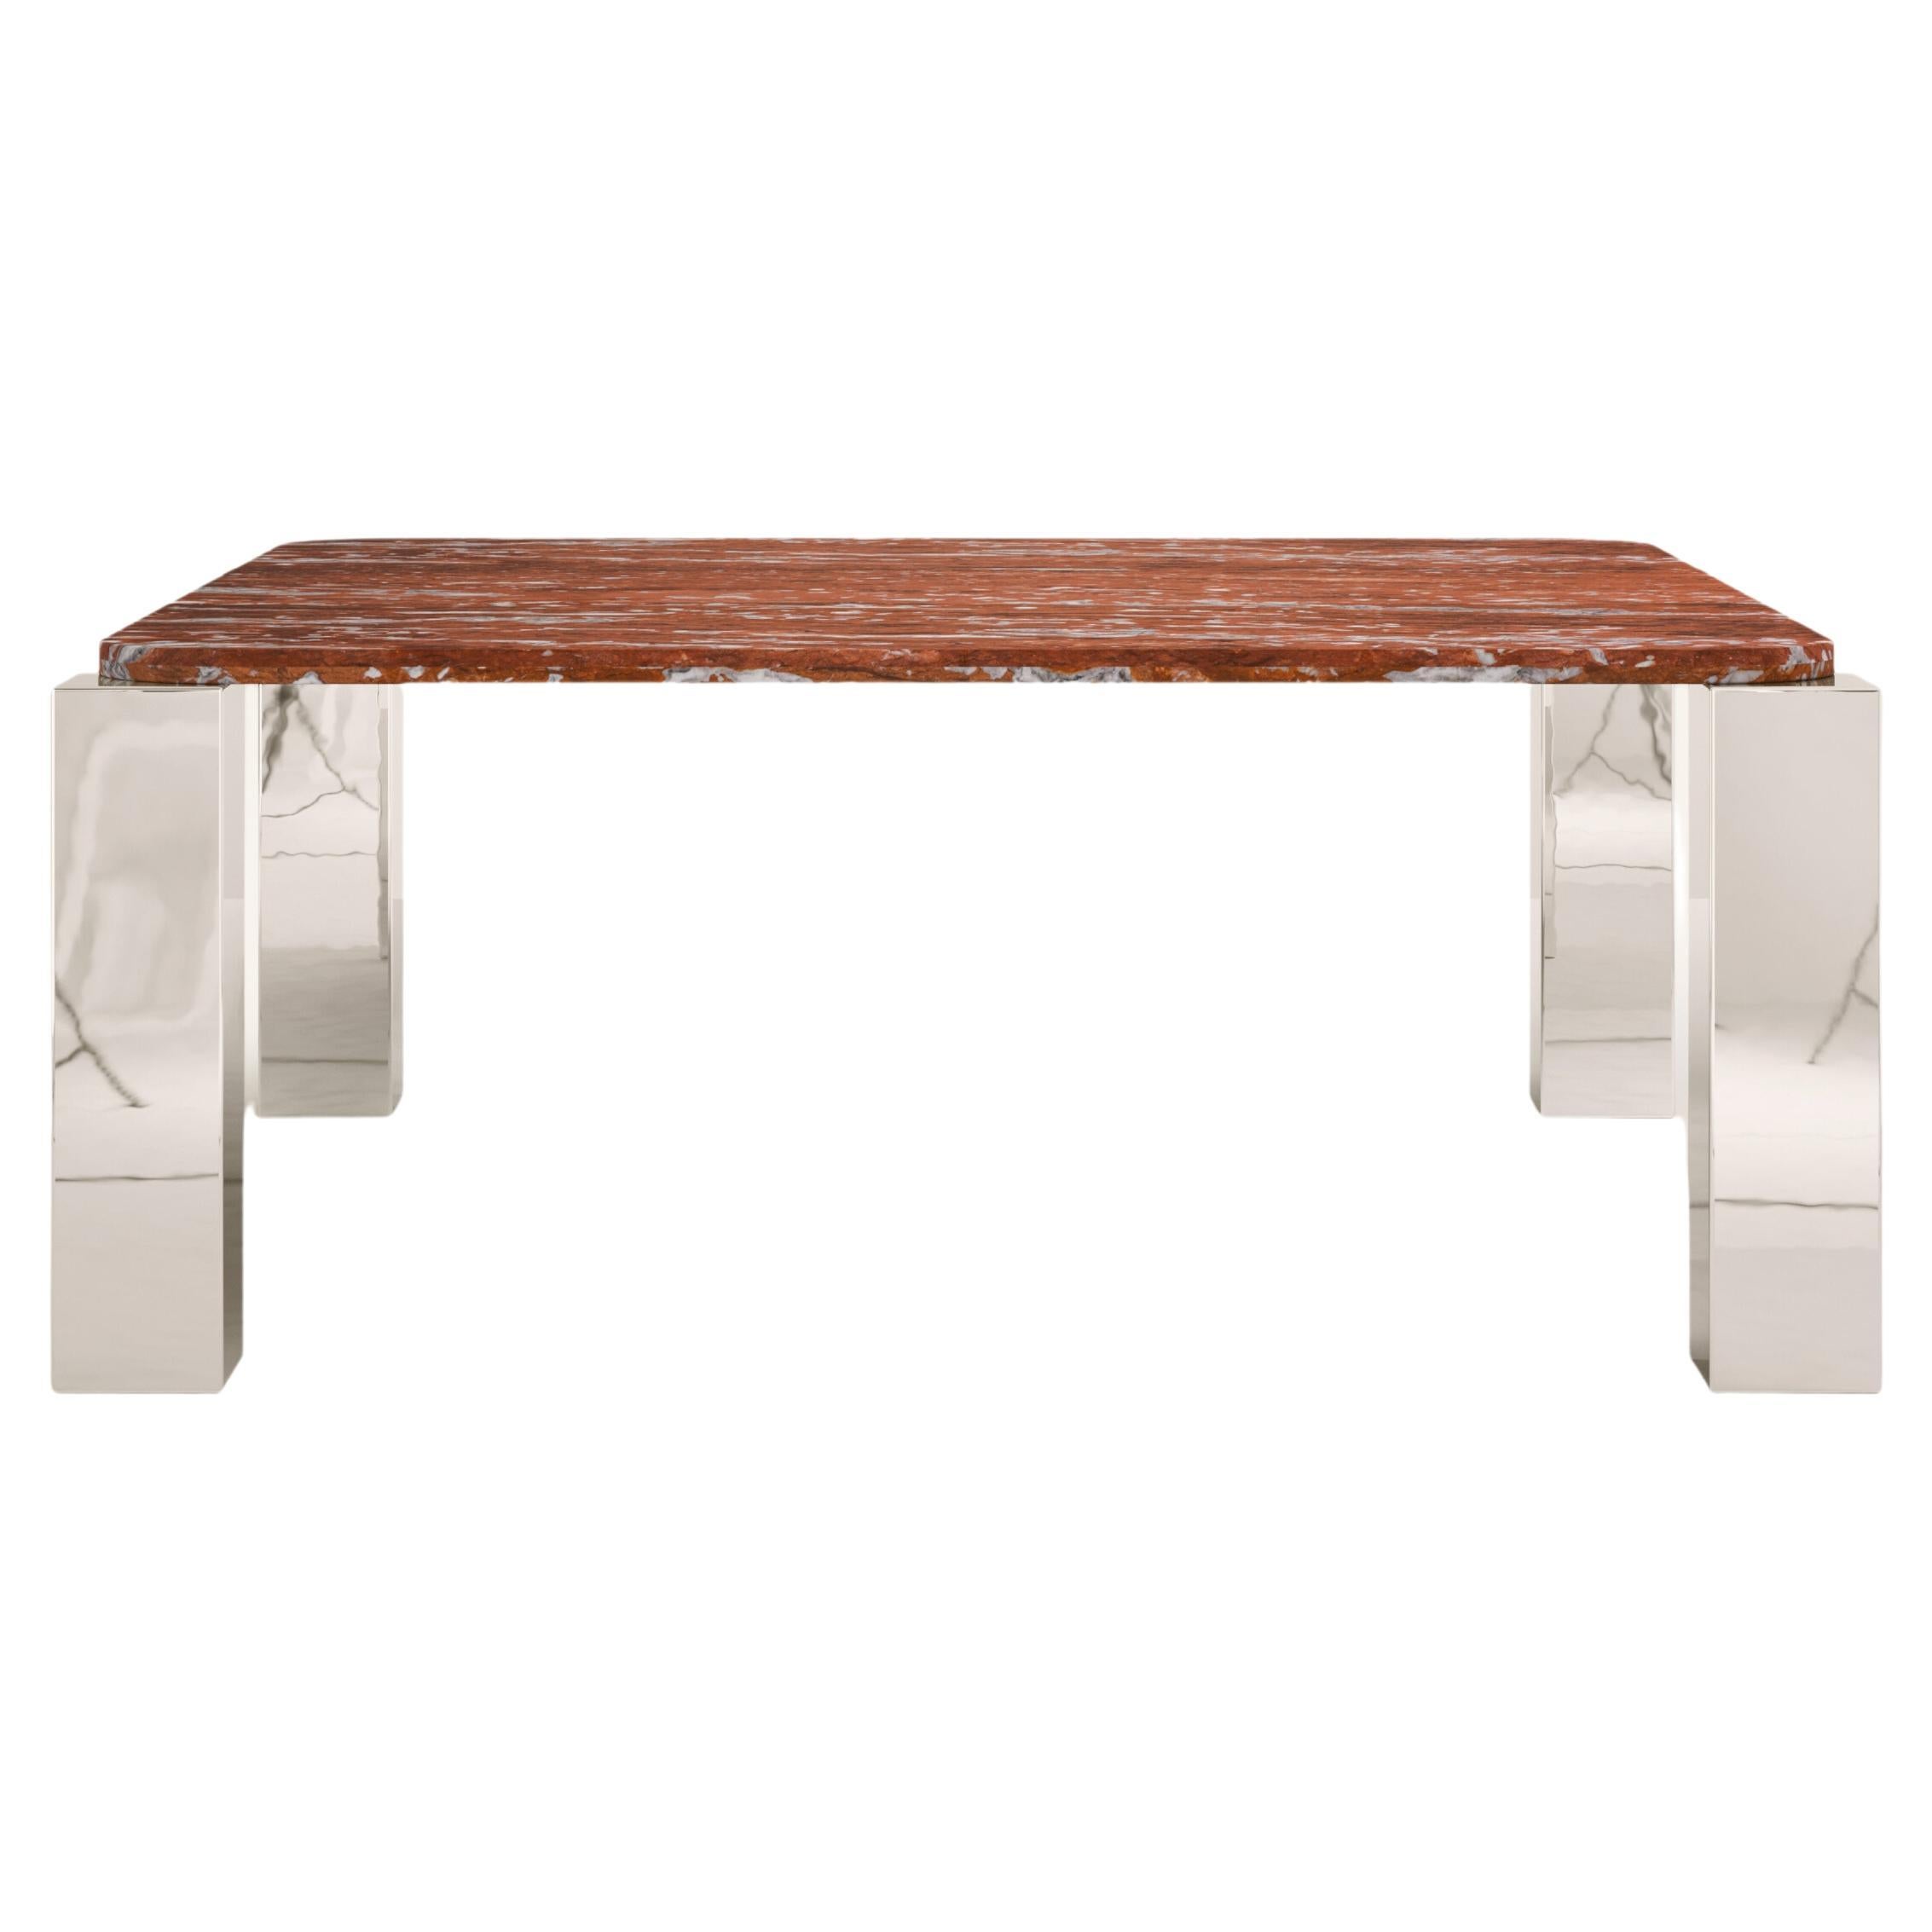 FORM(LA) Cubo Square Dining Table 74”L x 74”W x 30”H Francia Marble & Chrome For Sale